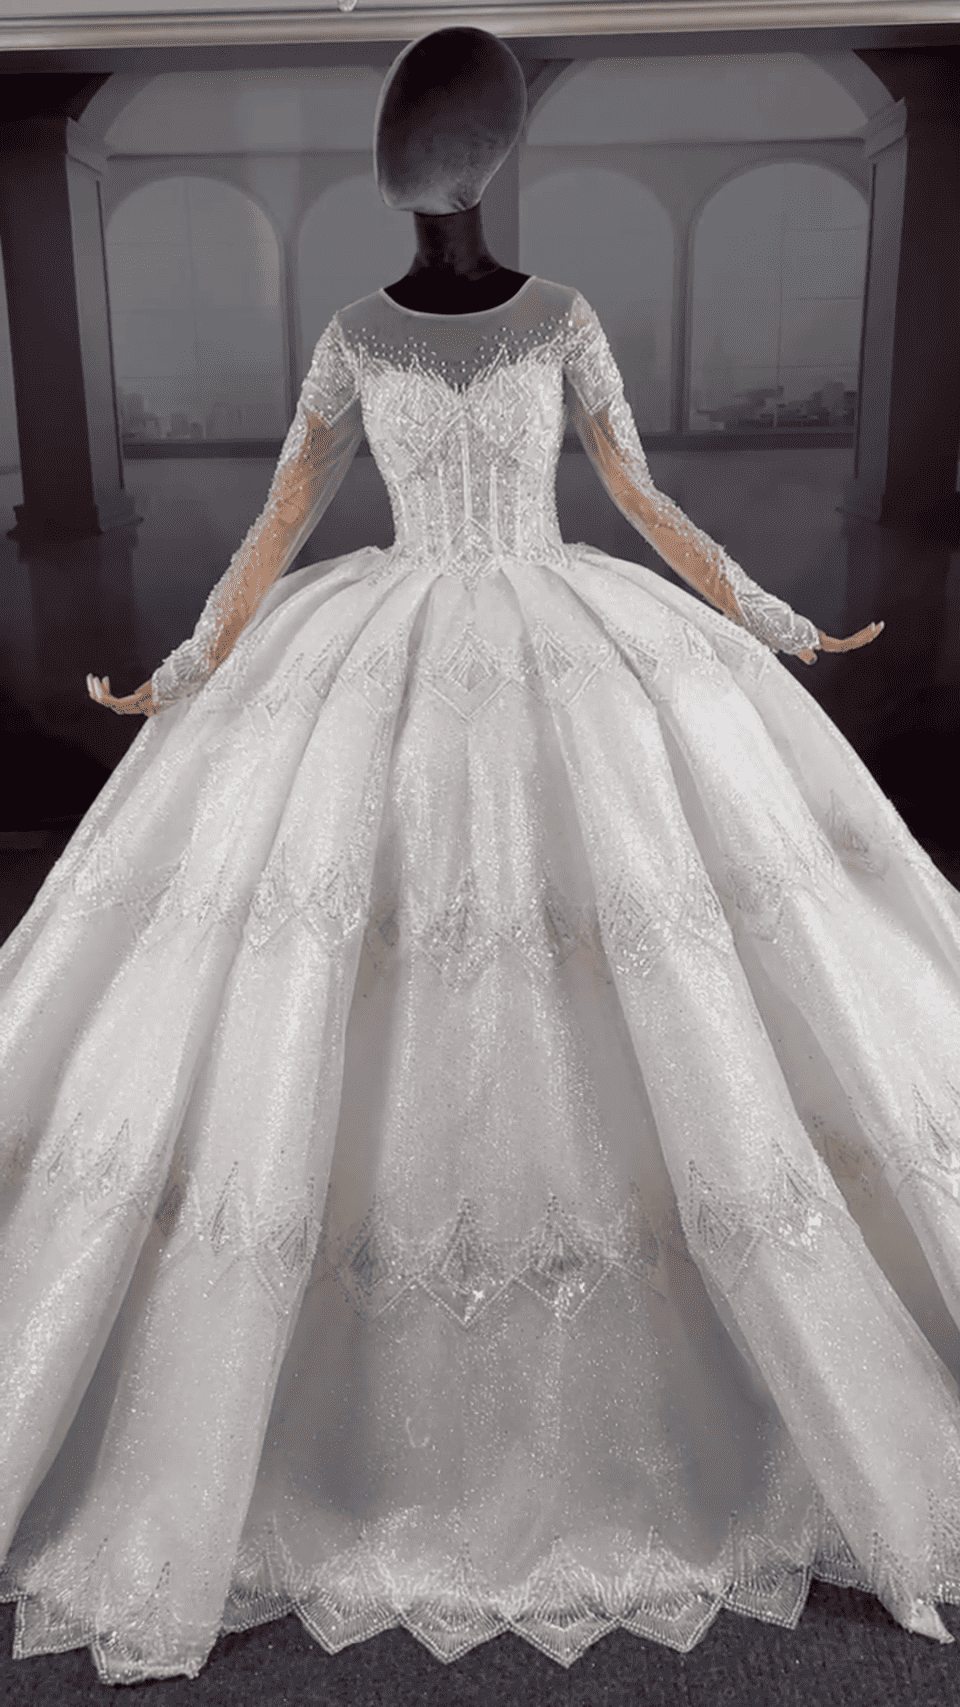 Elegant ivory A-line bridal gown with lace appliqué and sweetheart neckline